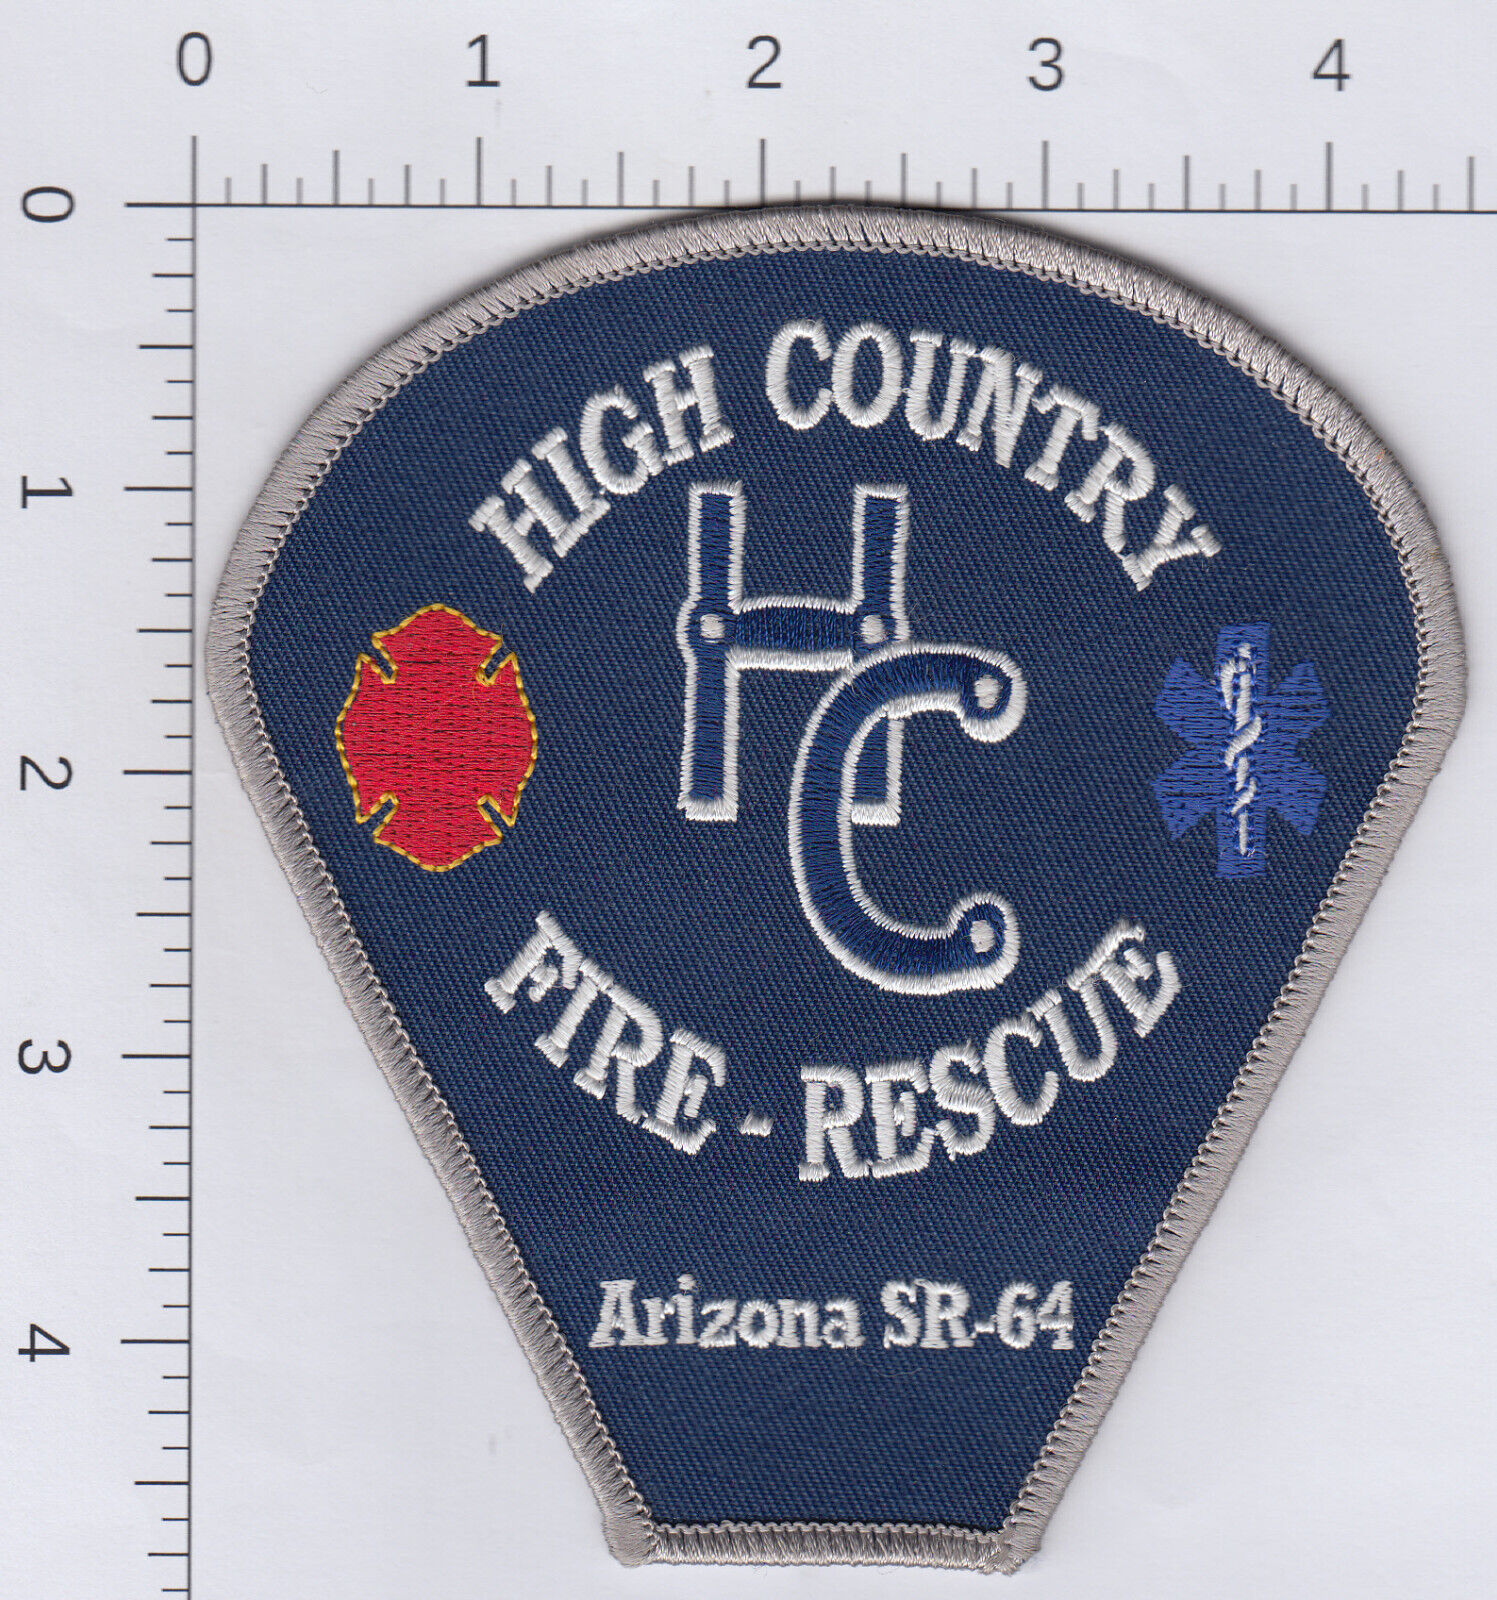 Arizona SR-64 High Country Fire-Rescue patch. See scan.